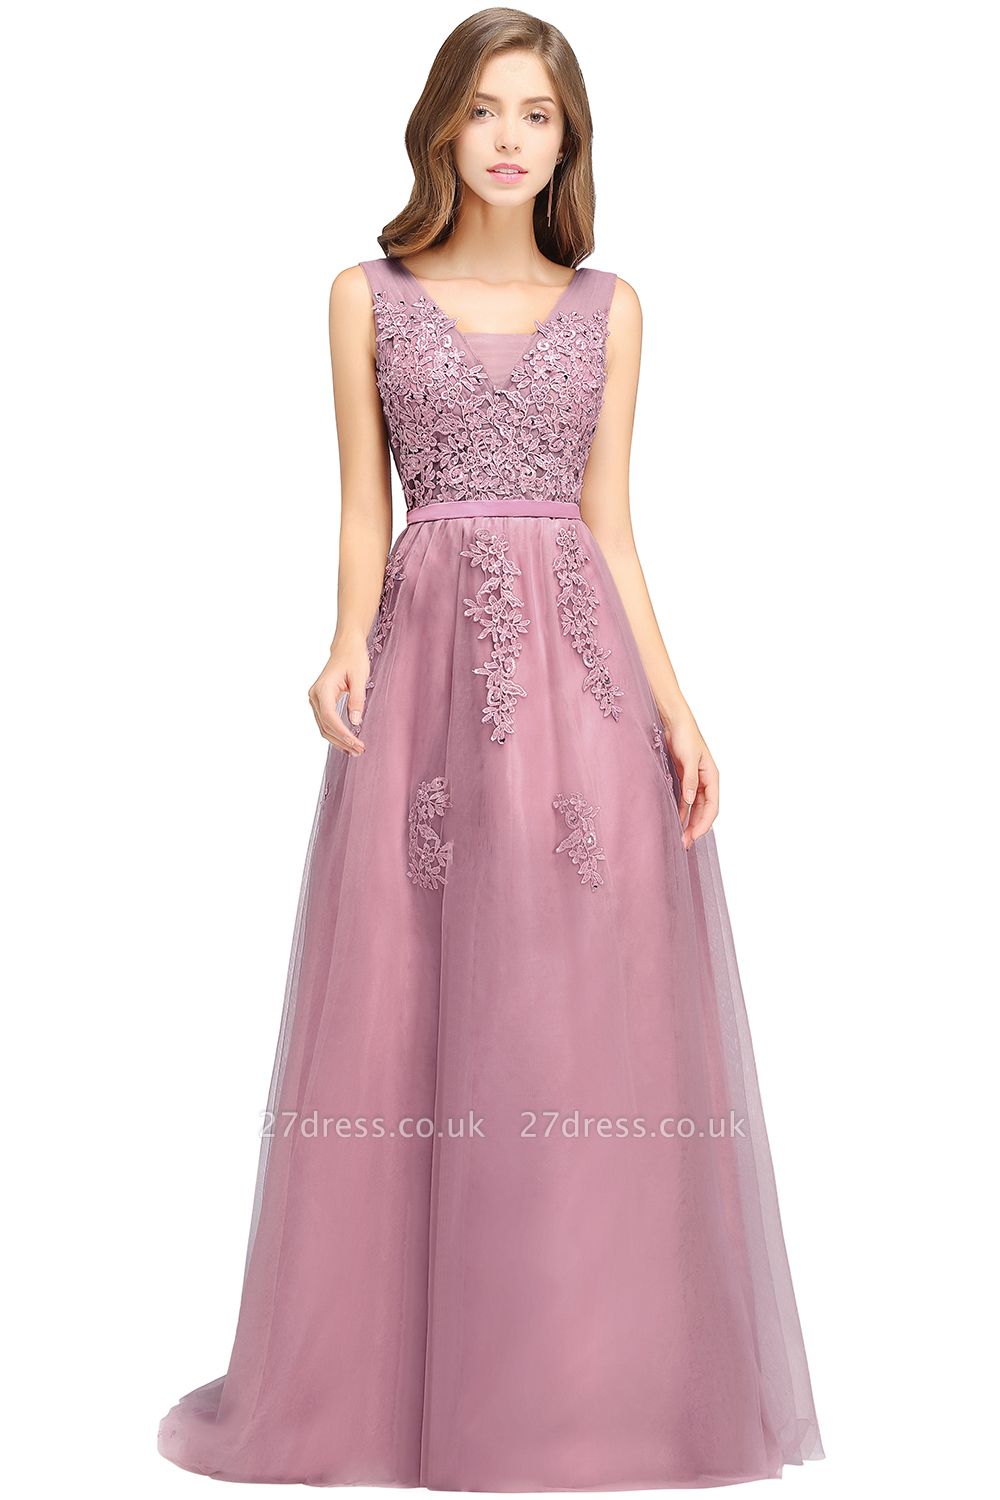 ADDYSON | A-line Floor-length Tulle Bridesmaid Dress with Appliques